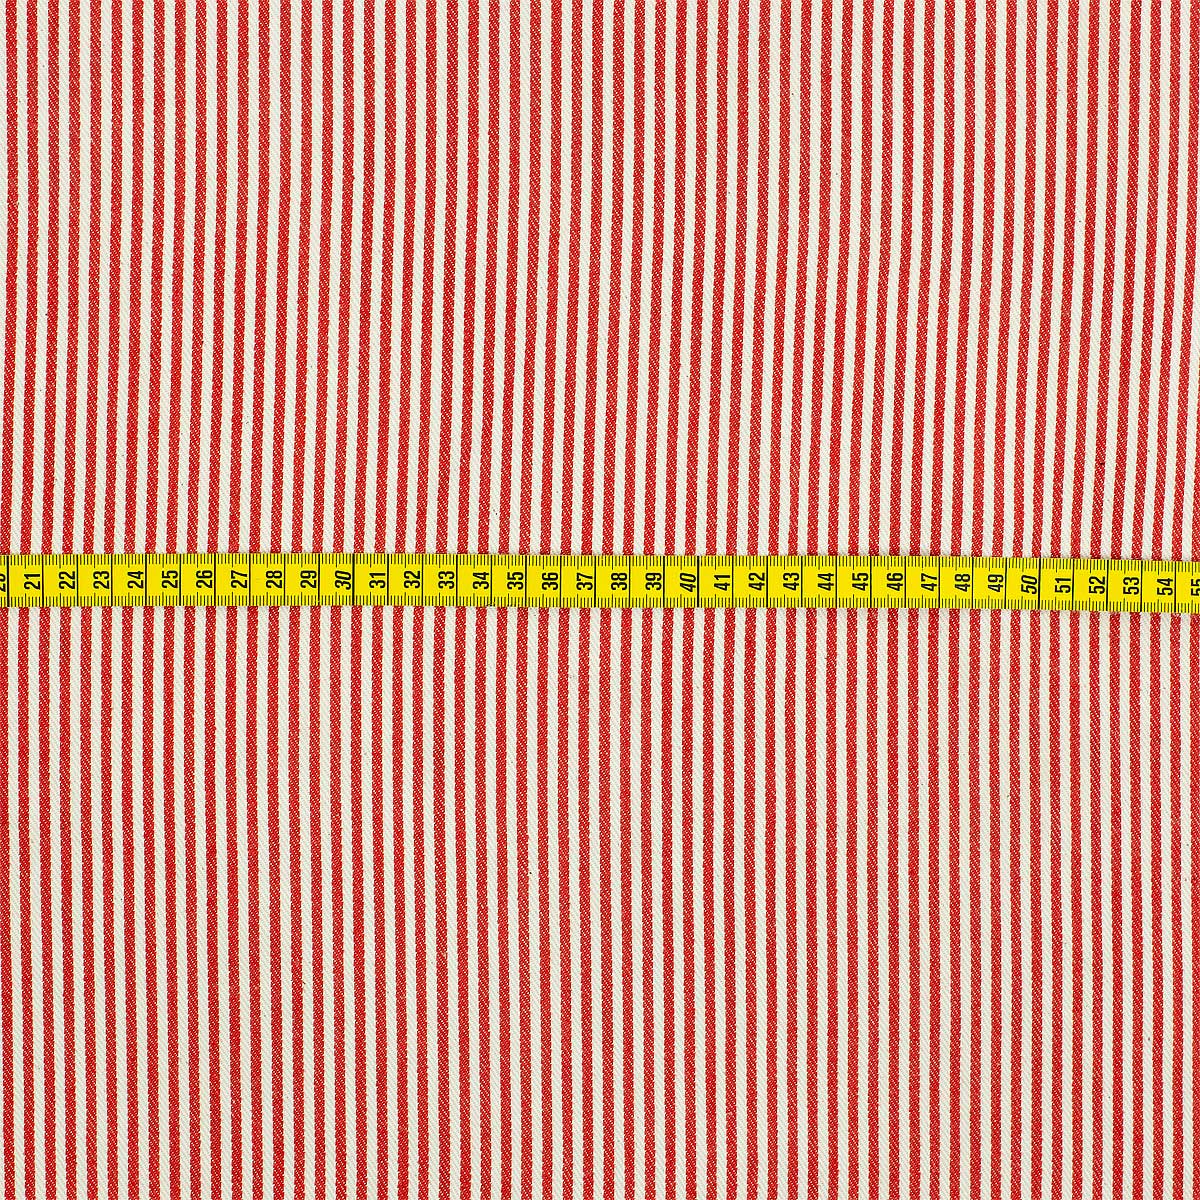 HECTOR Fabric 116 cm, red/white